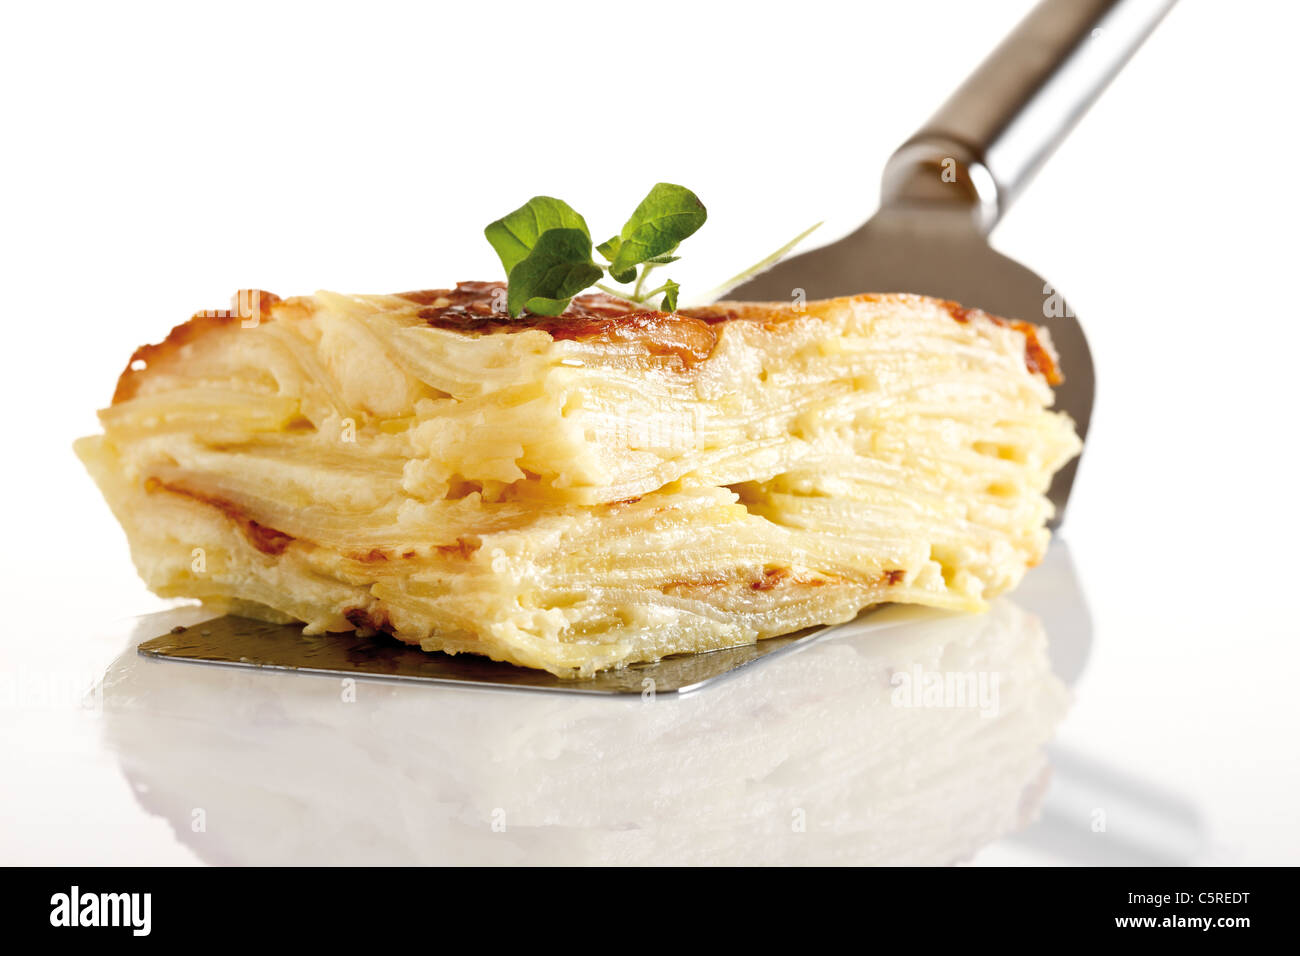 Piece of potato bake on plate, elevated view Stock Photo